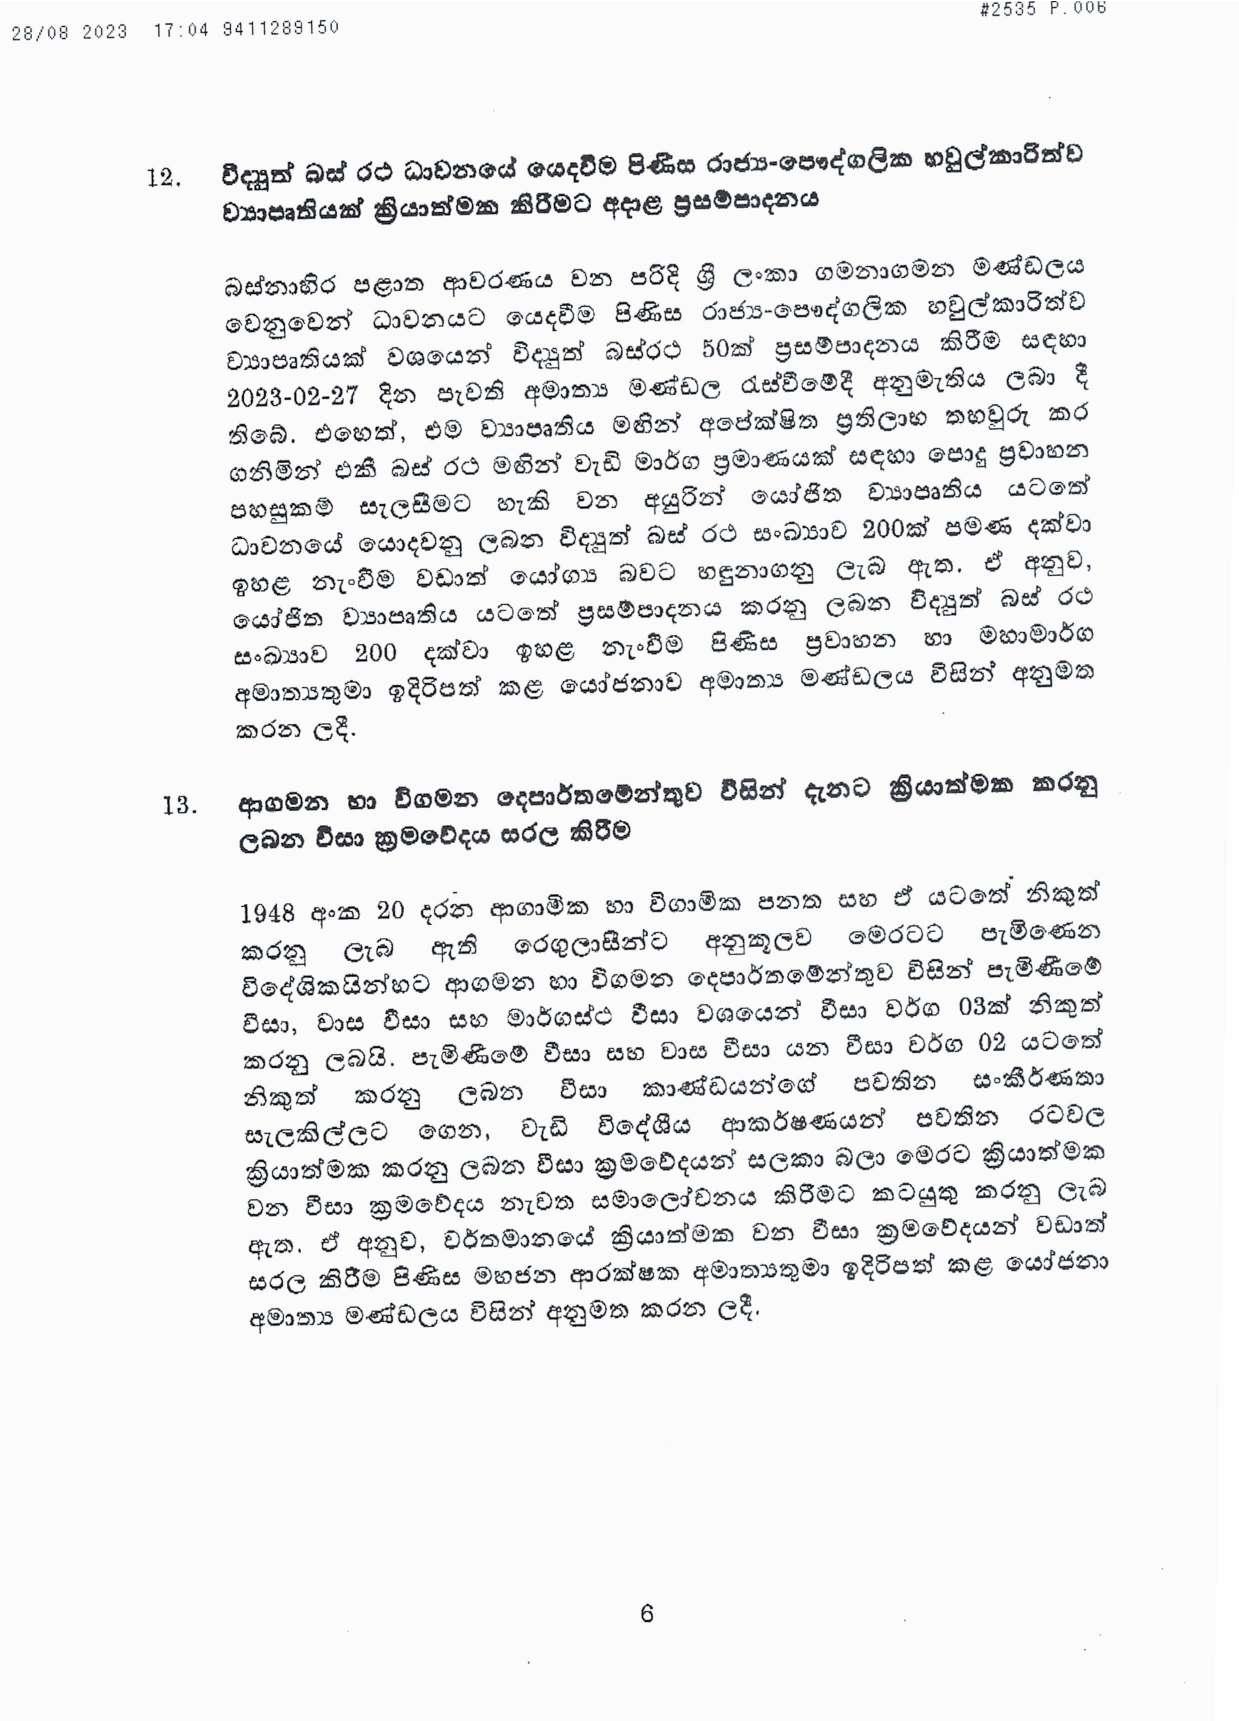 Cabinet Decision on 28.08.2023 1 page 006